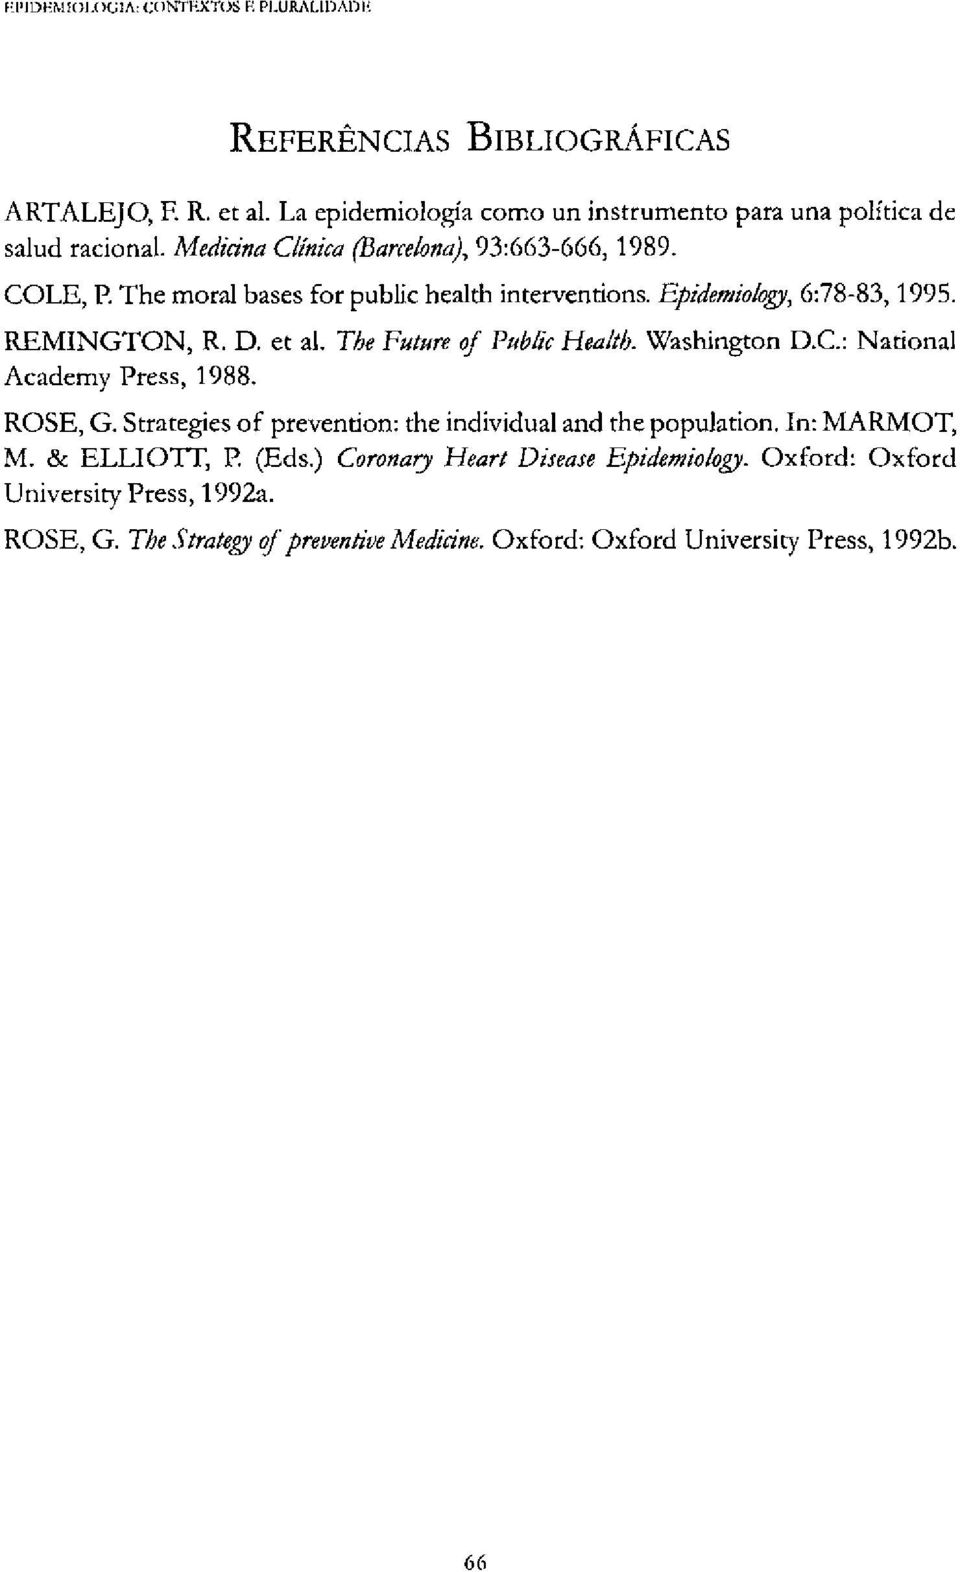 The Future of Public Health. Washington D.C.: National Academy Press, 1988. ROSE, G. Strategies of prevention: the individual and the population.